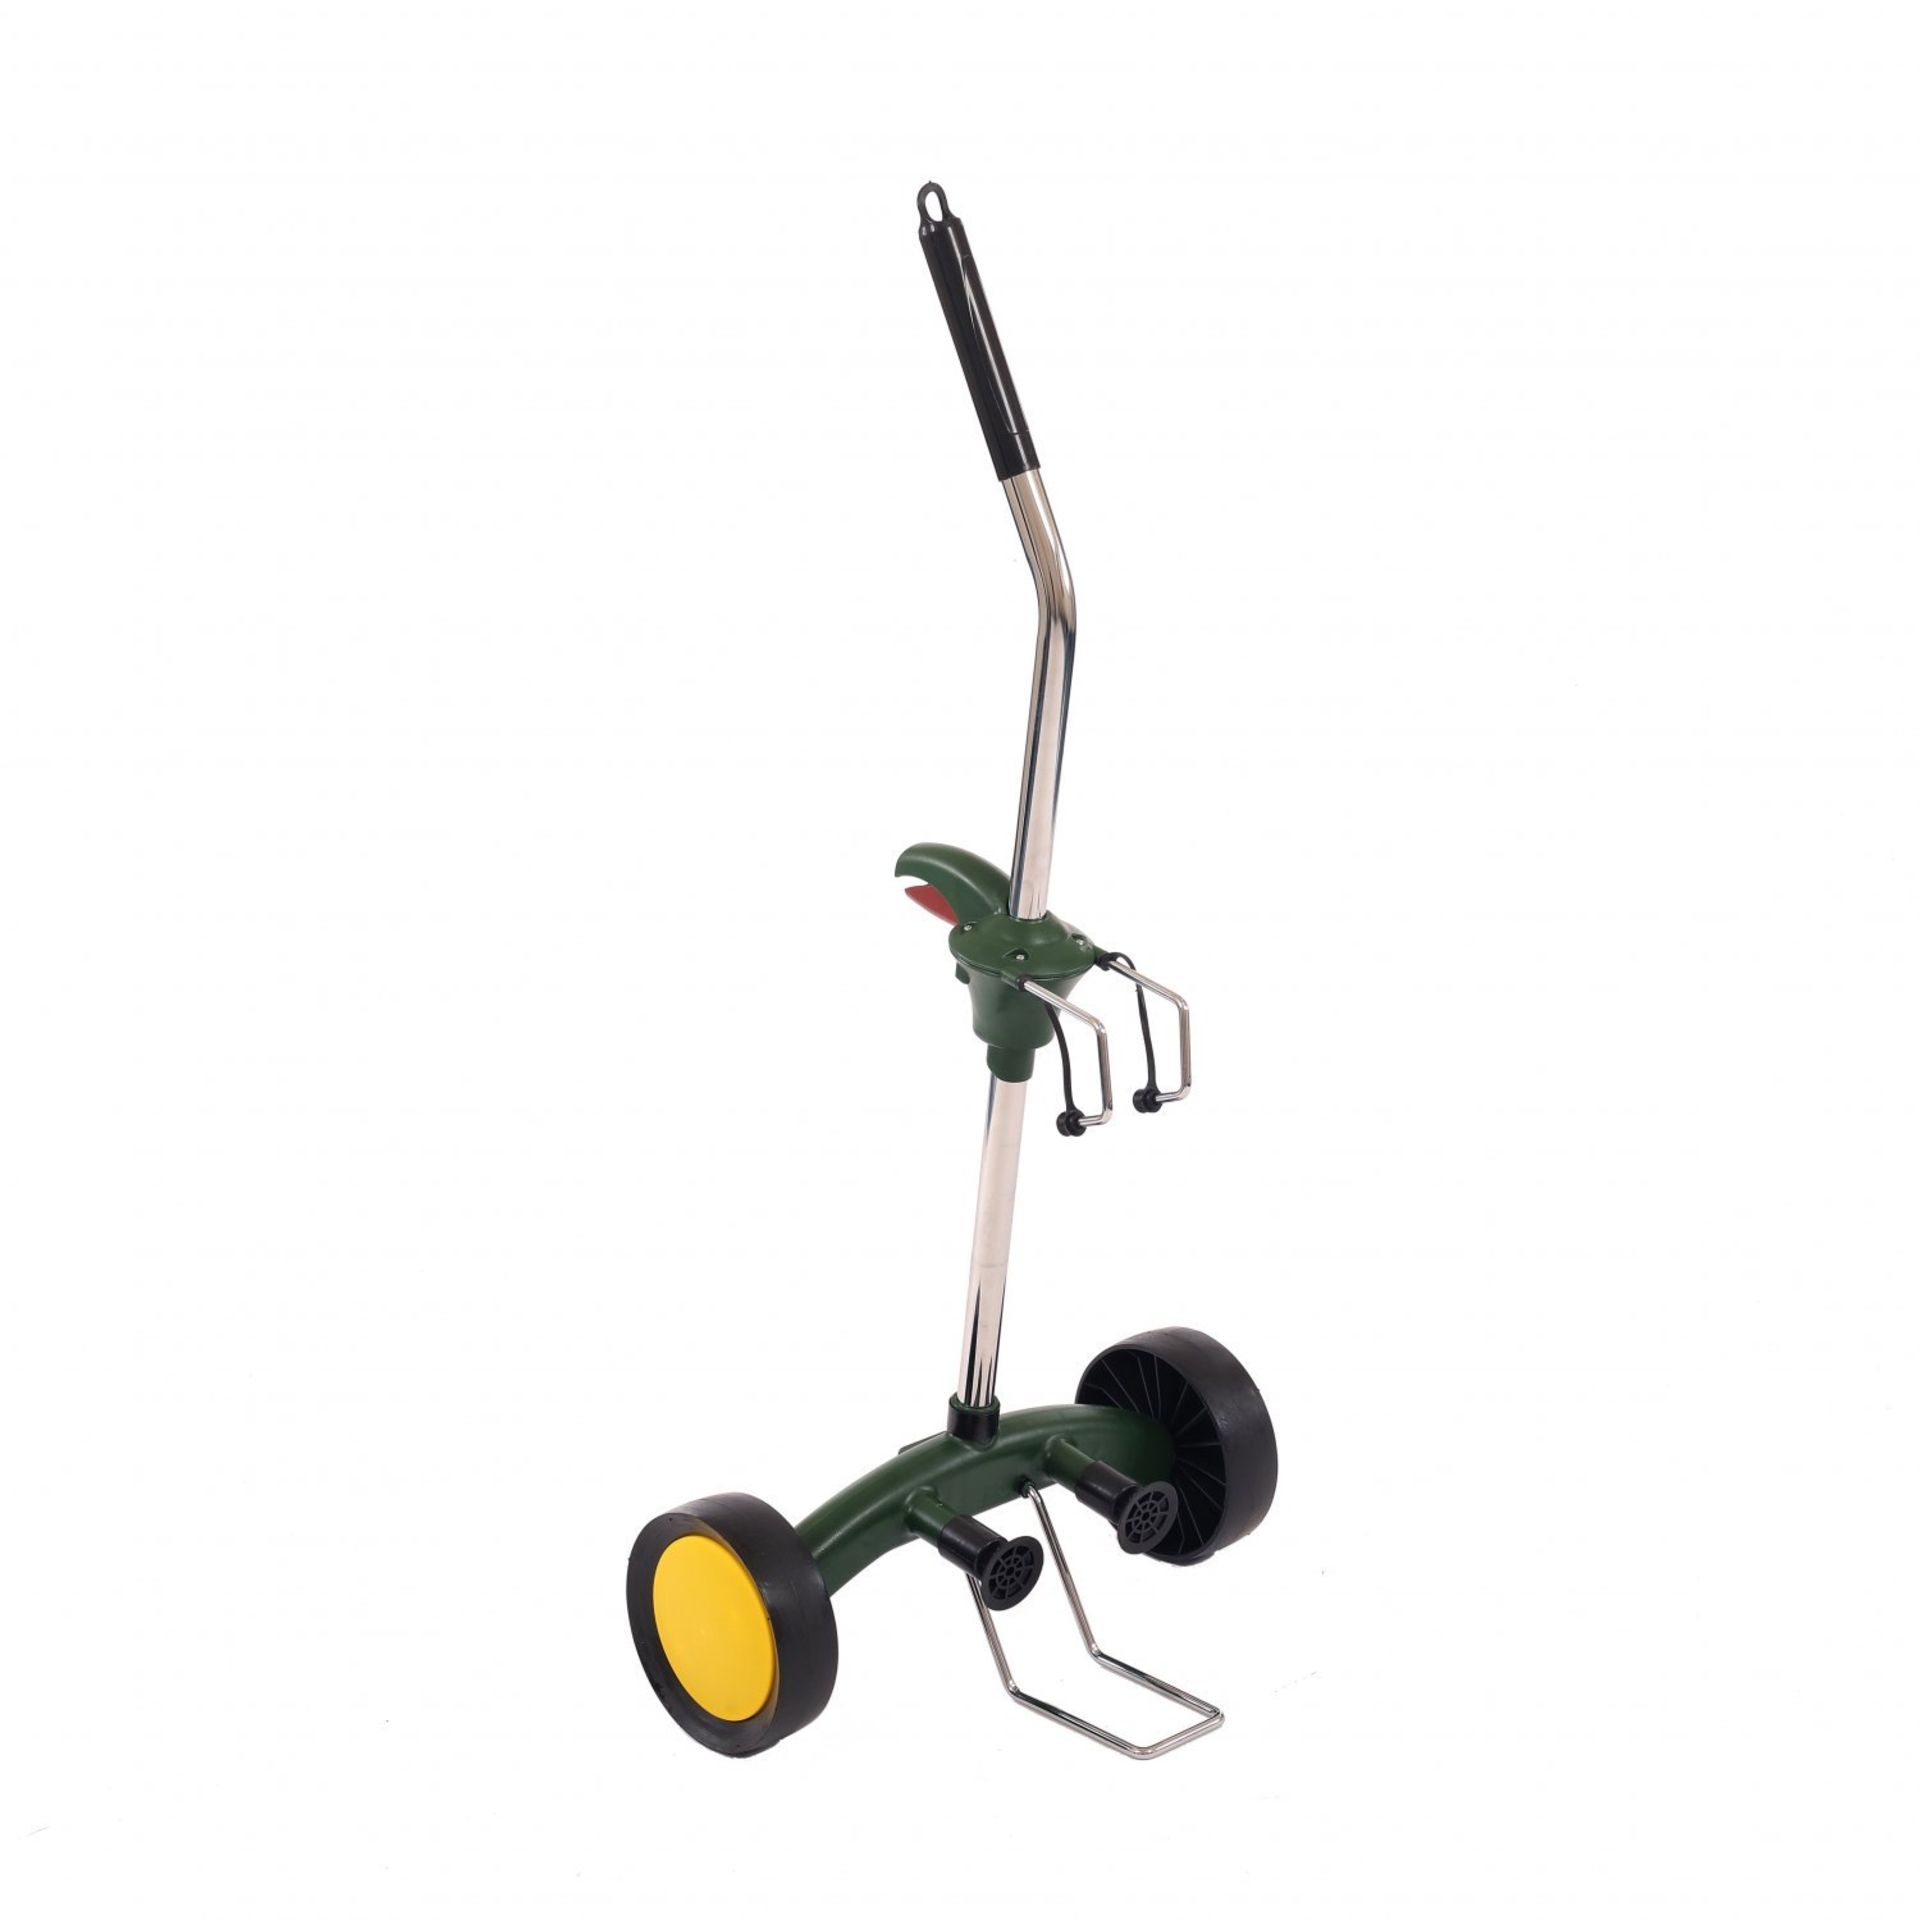 (KK231) Wheeled Plant Flower Pot Mover Transport Trolley Hand Truck The plant pot trolley al... - Image 2 of 2